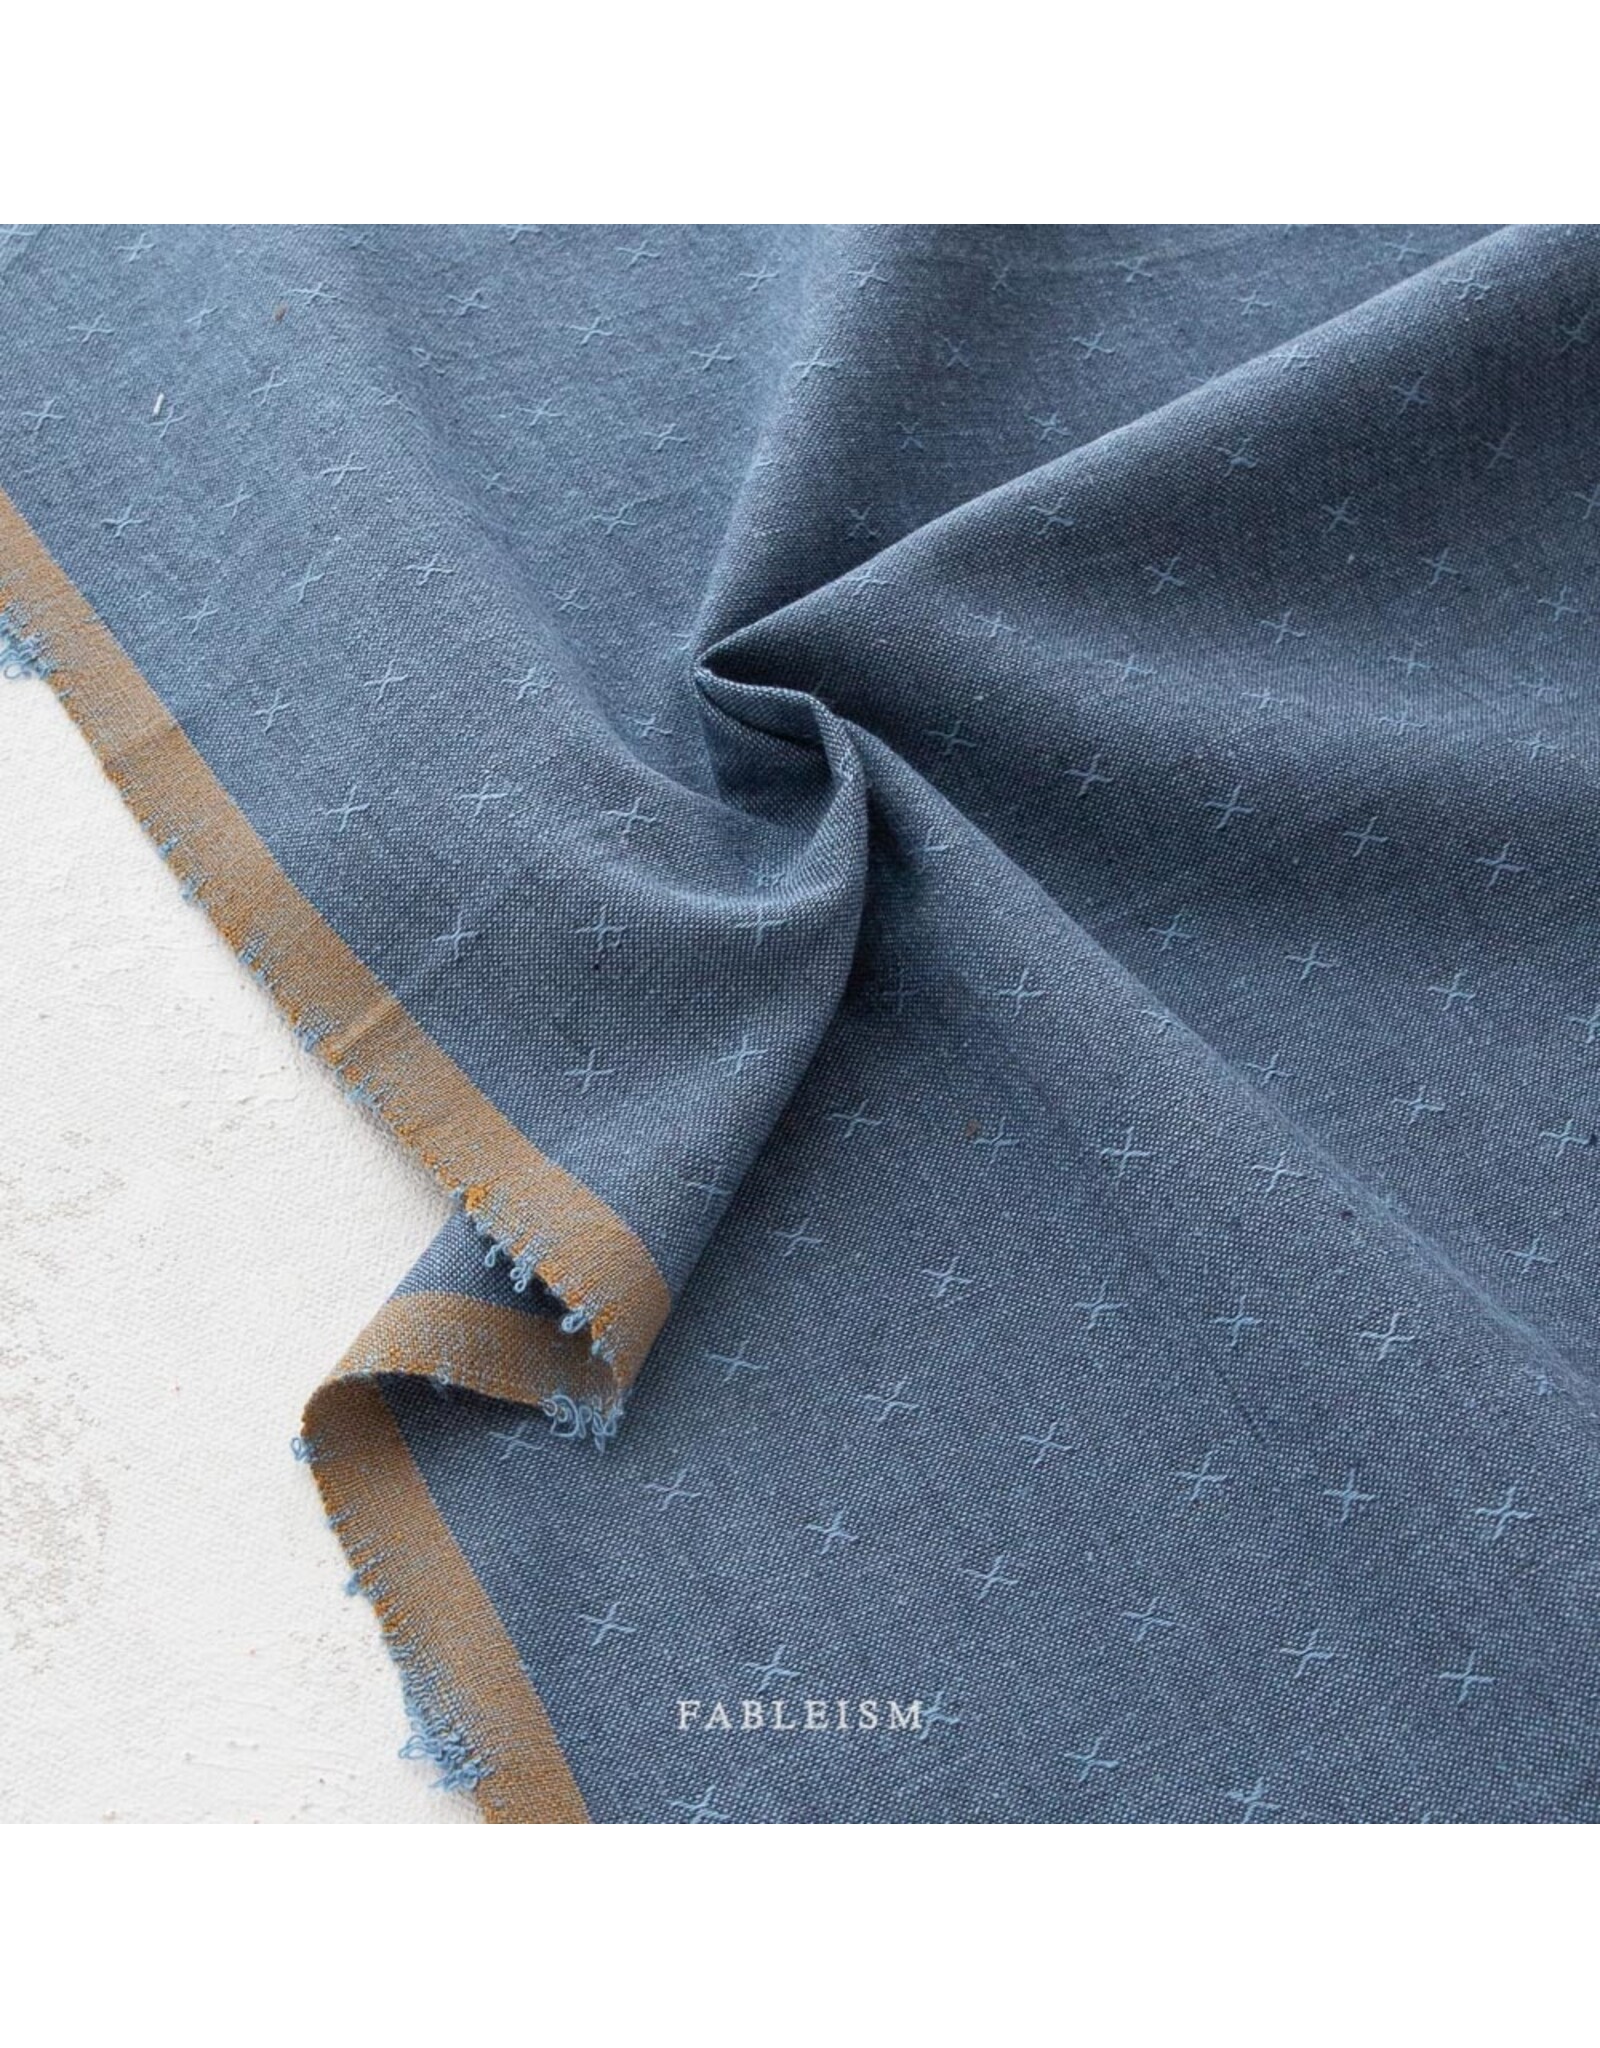 Fableism Sprout Wovens, Stellar, Fabric Half-Yards